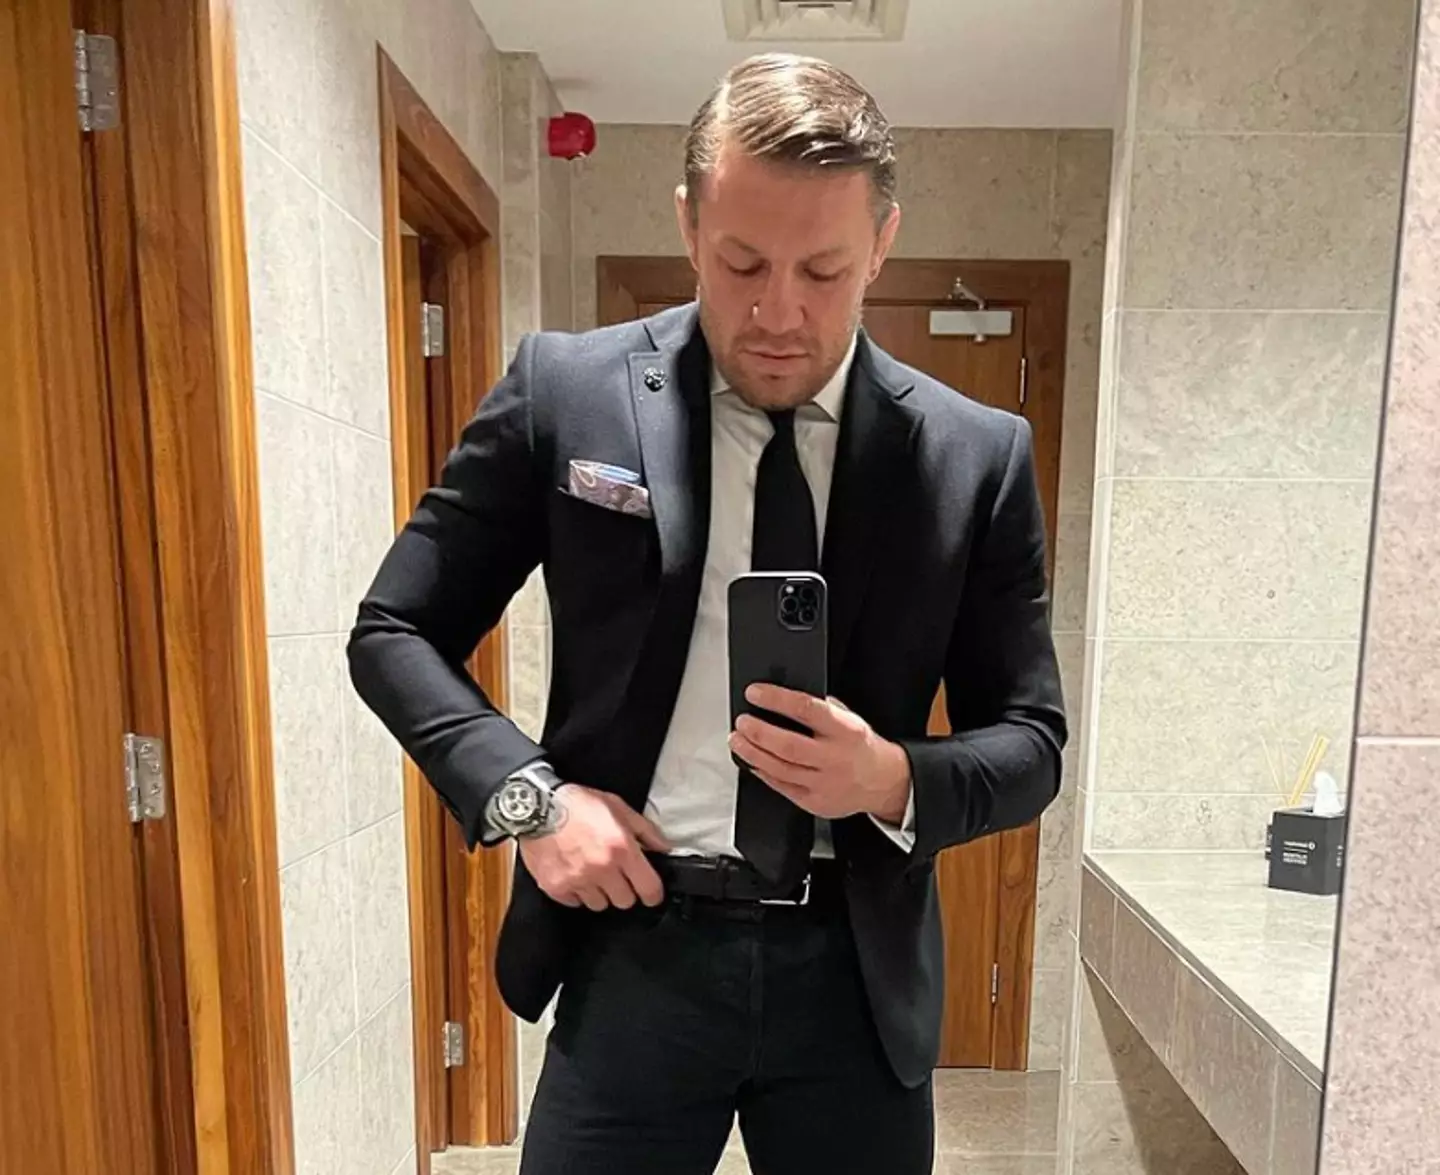 Conor McGregor shared a series of photos from the funeral.